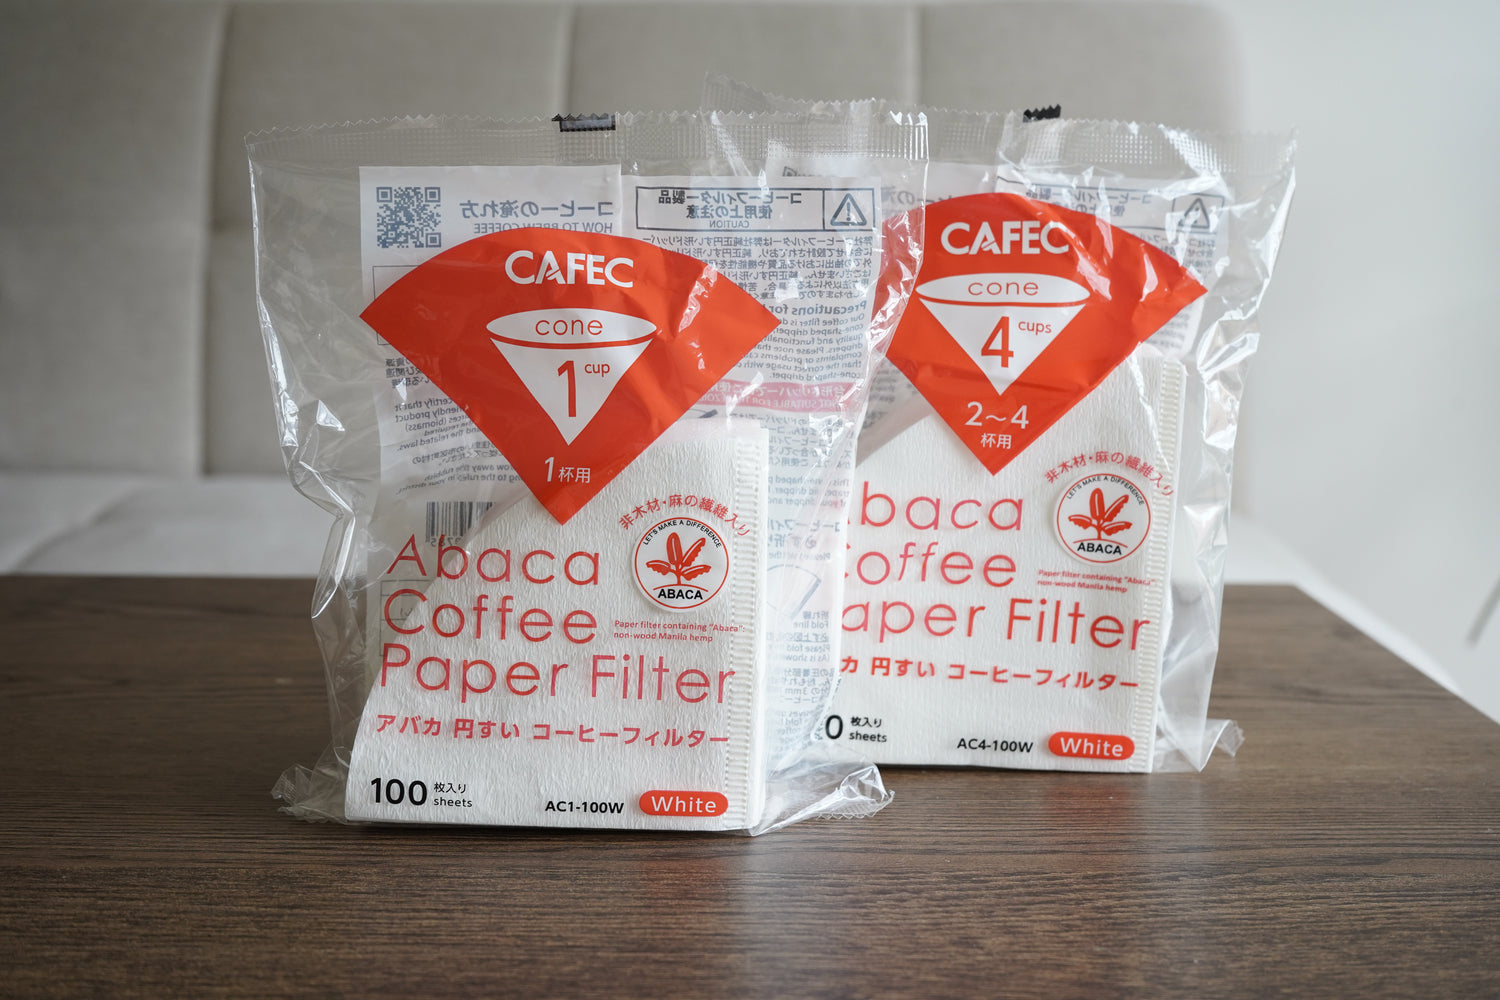 Cafec Coffee Filters Flower dripper - cafec australia coffee brewing tools Basic Barista Coffee Fitler Specialty coffee barista supplies Coffee gears